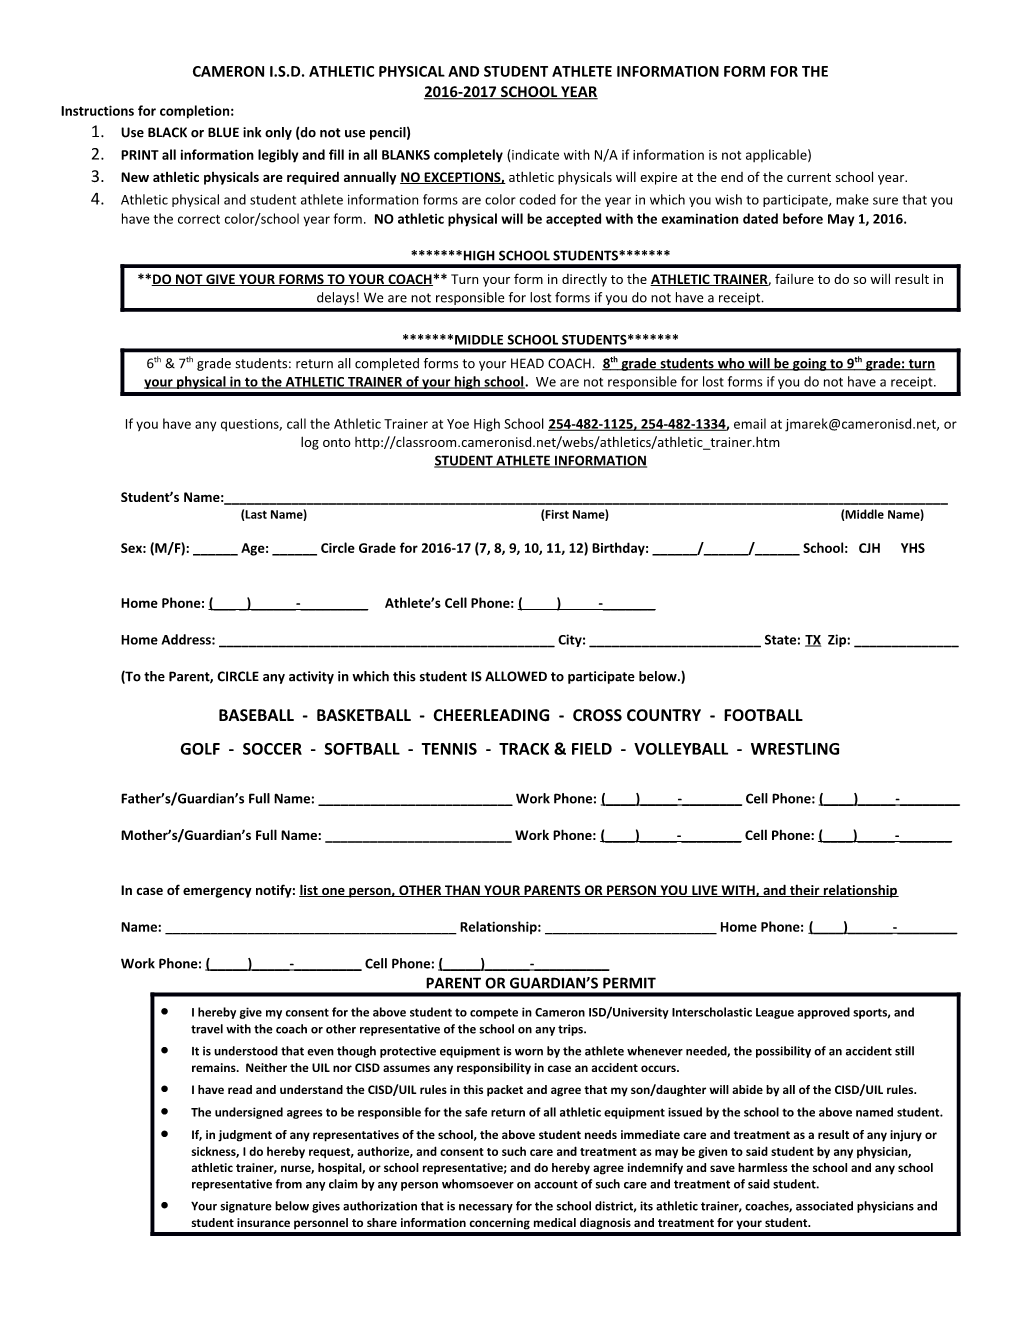 Cameron I.S.D. Athletic Physical and Student Athlete Information Form for The